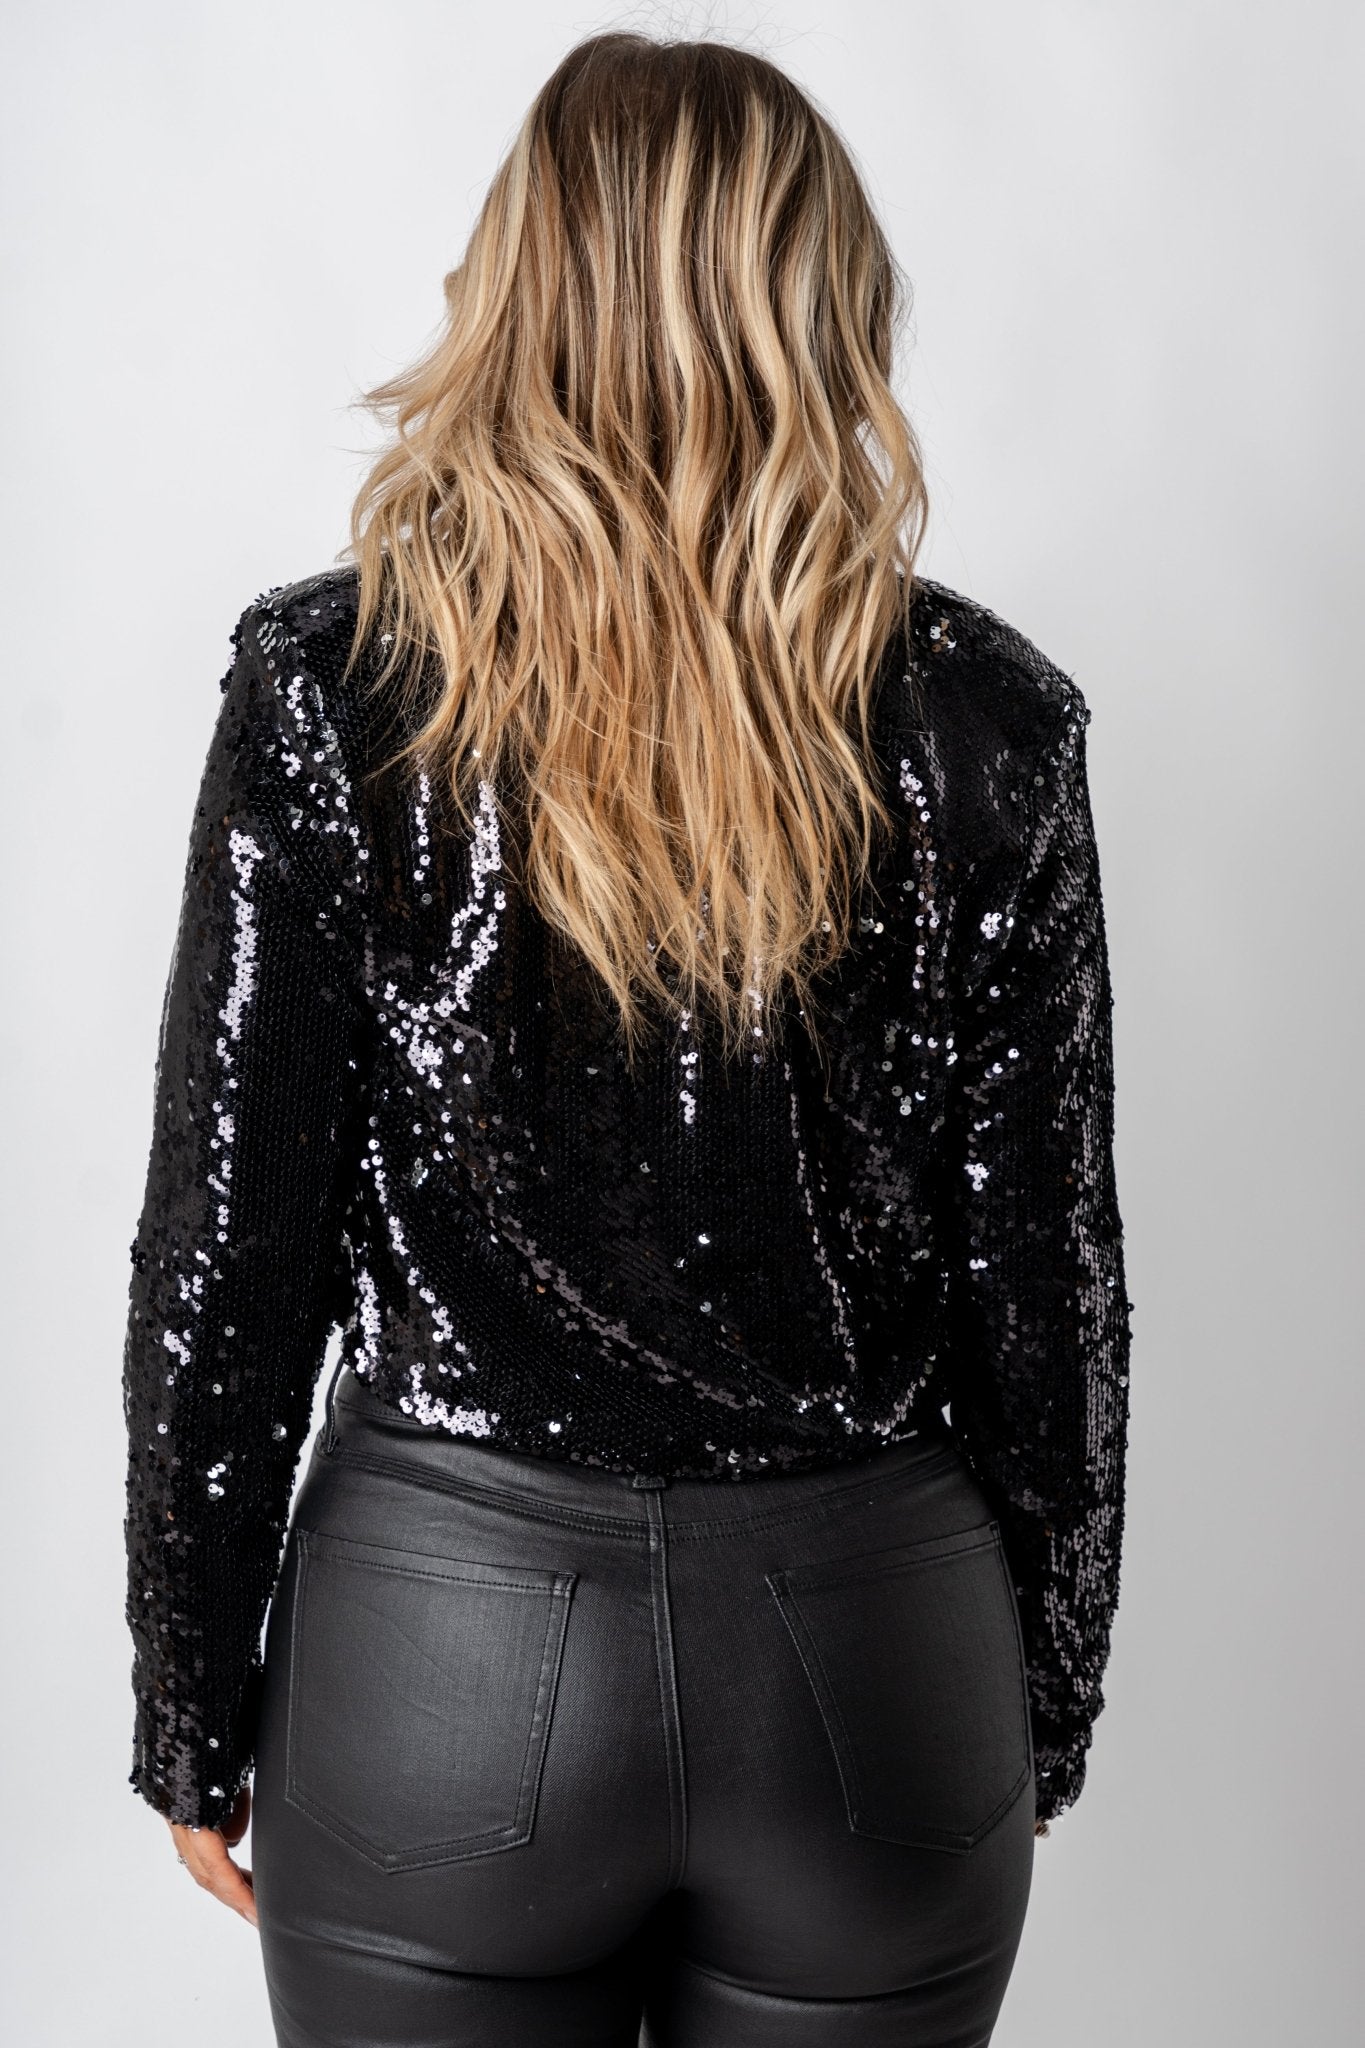 Sequin jacket w/ shoulder pads black - Trendy New Year's Eve Dresses, Skirts, Kimonos and Sequins at Lush Fashion Lounge Boutique in Oklahoma City